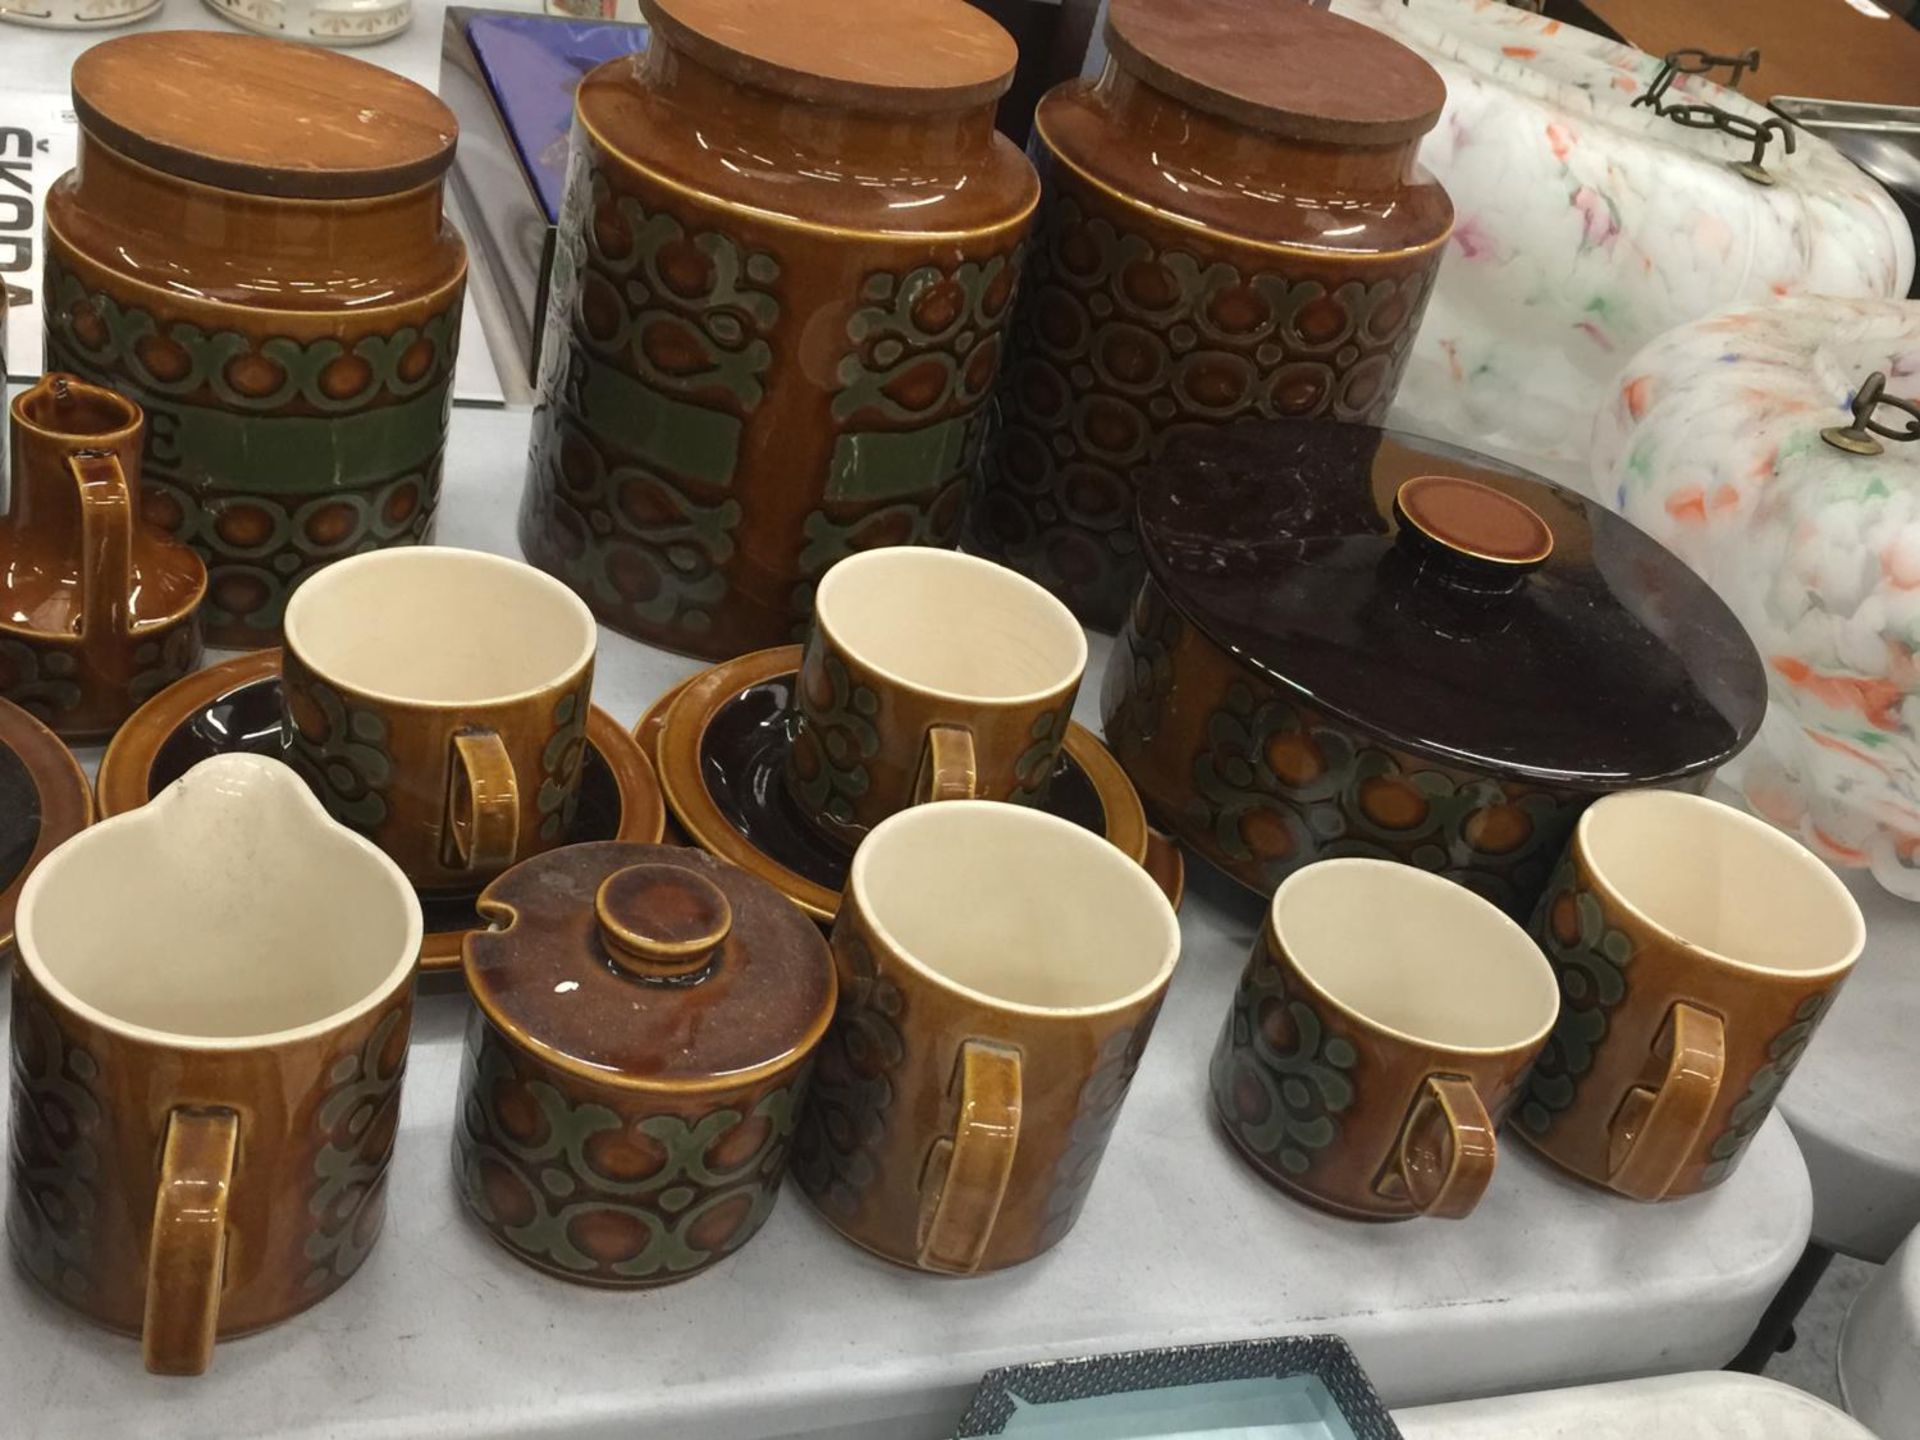 A QUANTITY OF HORNSEA POTTERY 'BRONTE' TO INCLUDE STORAGE JARS, TUREEN, CUPS, SAUCERS, JUGS, SUGAR - Image 7 of 7